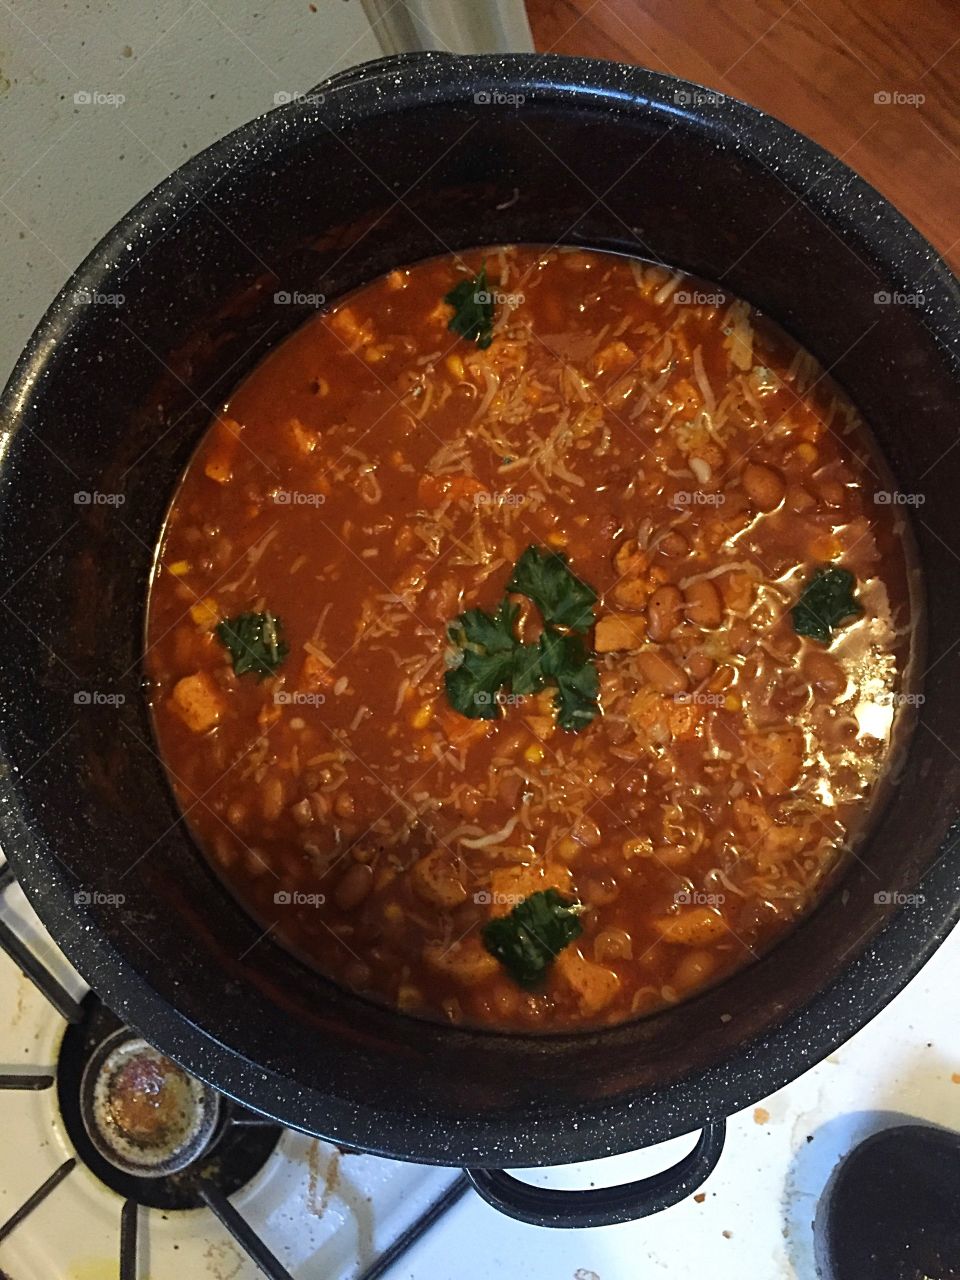 Pot of chicken chili on stove